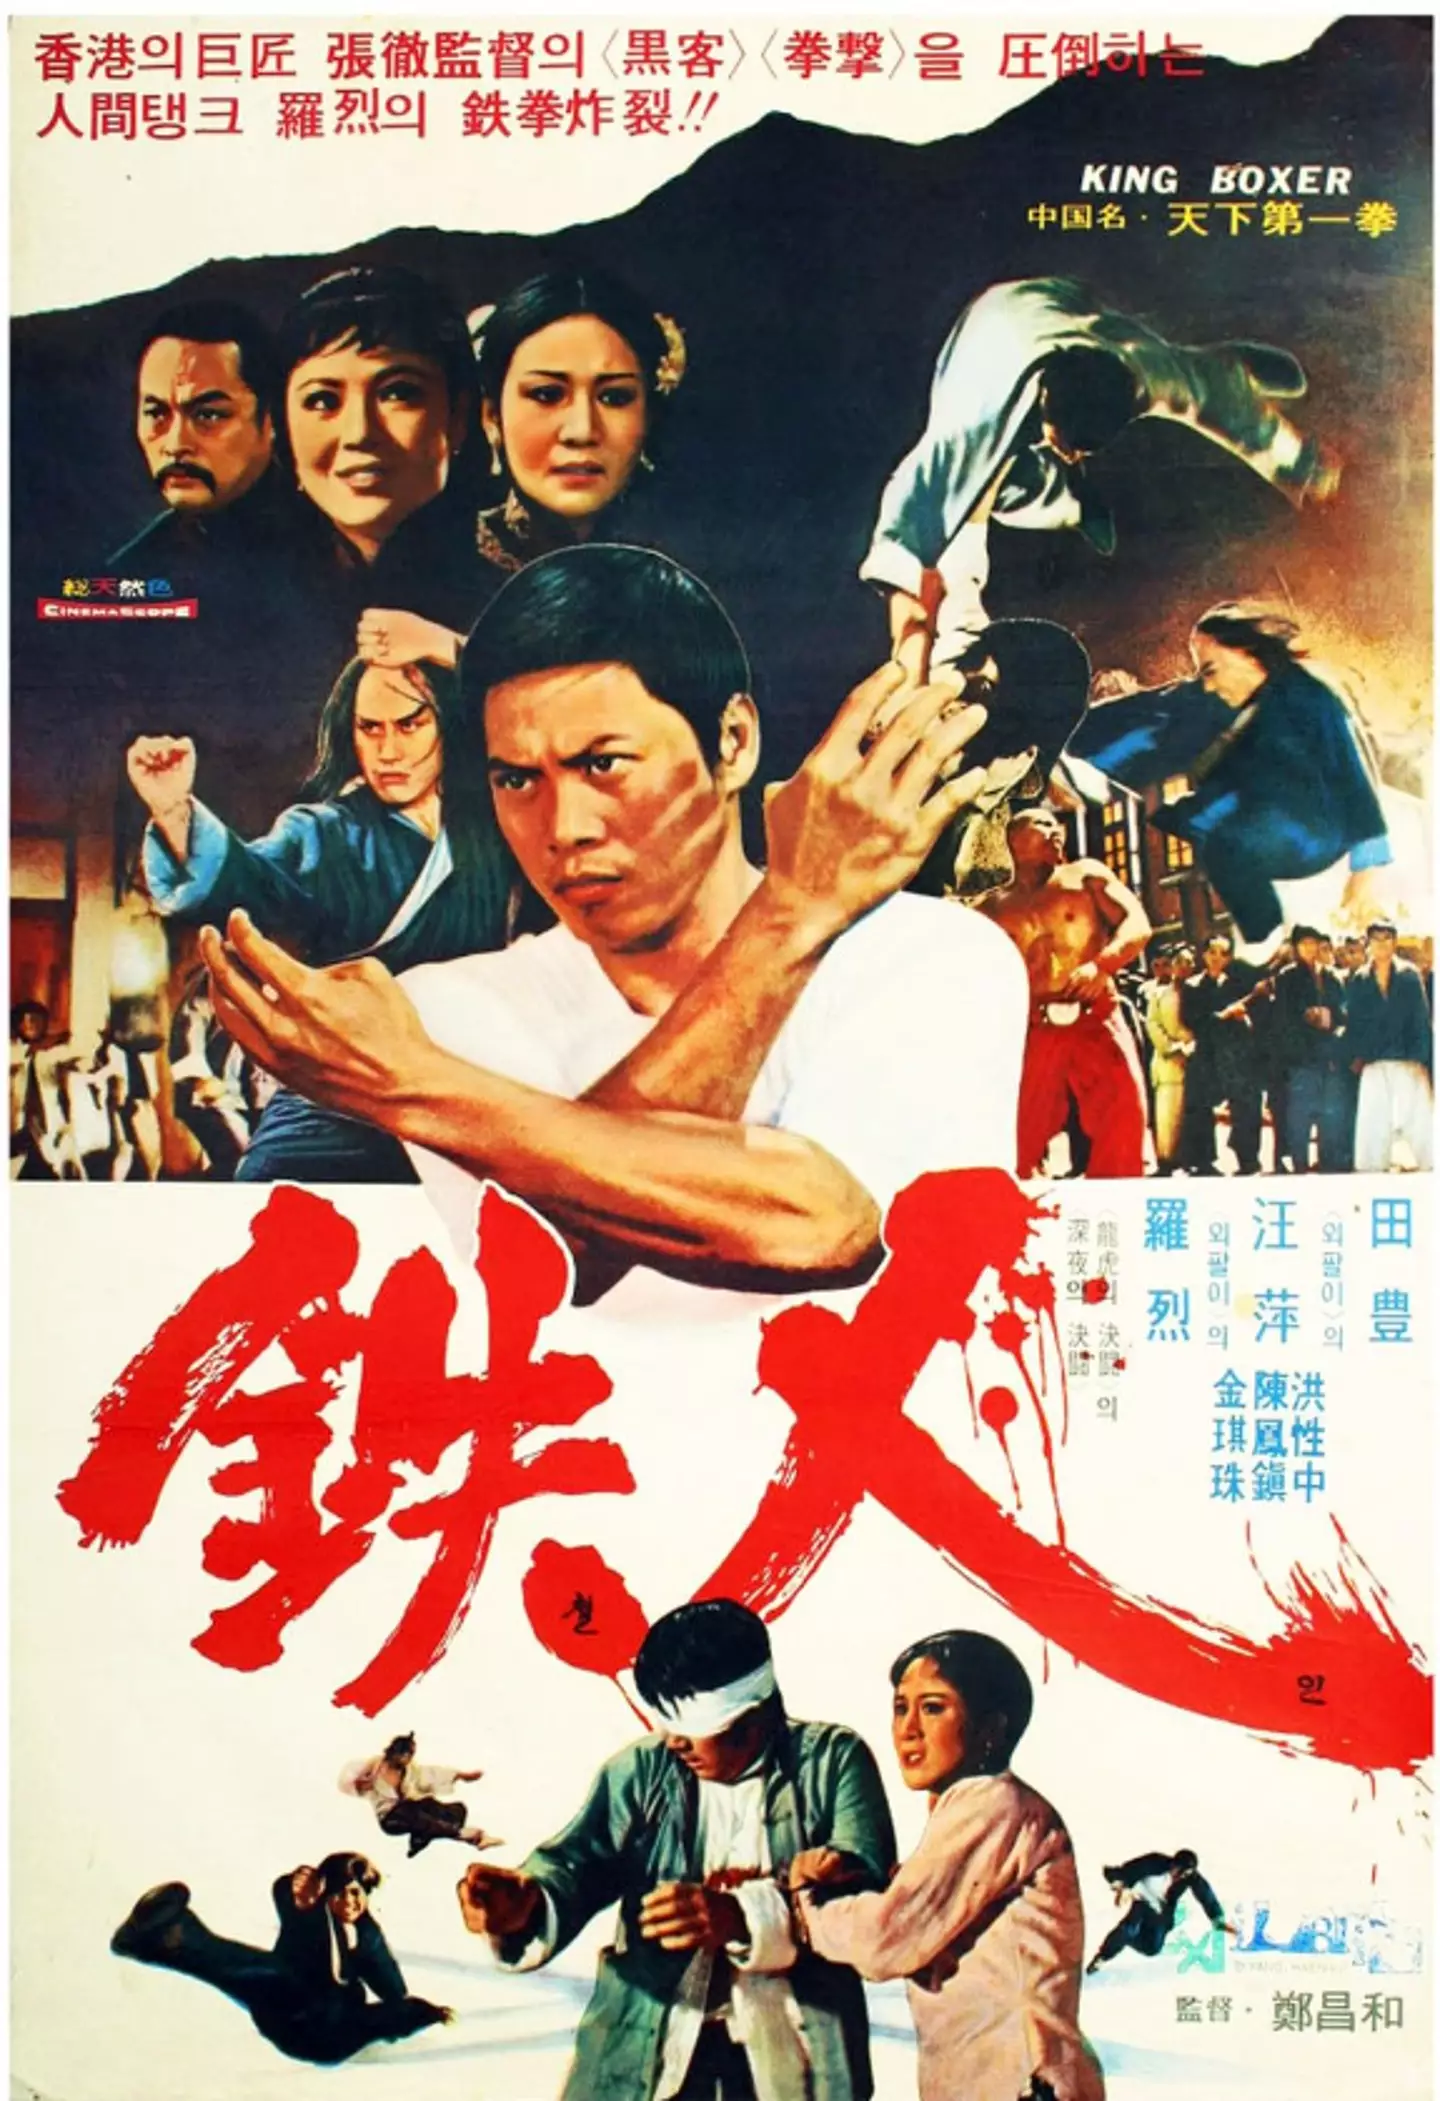 One of the most influential Kung fu movies of all time.